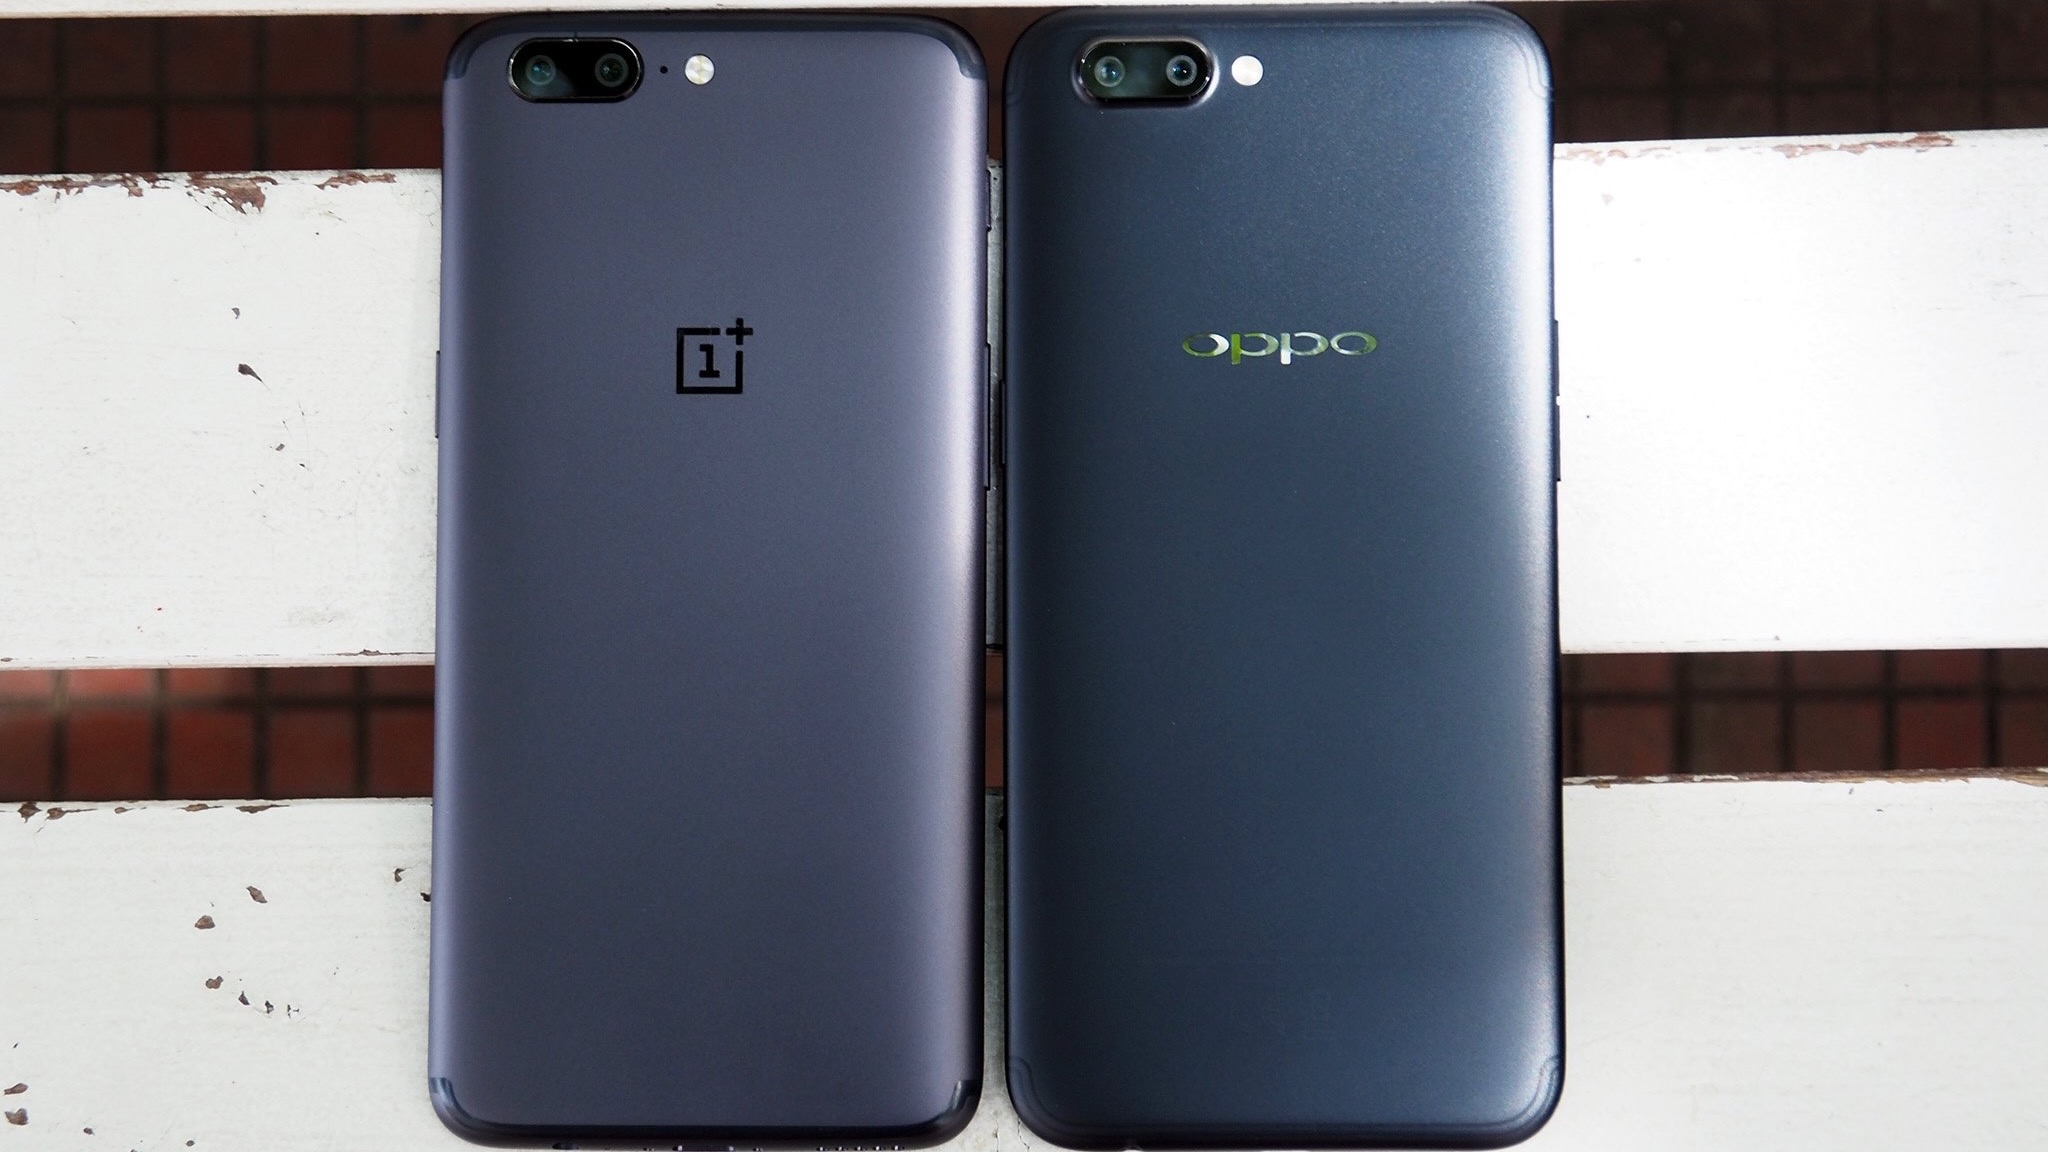 OnePlus 5 and OPPO R11